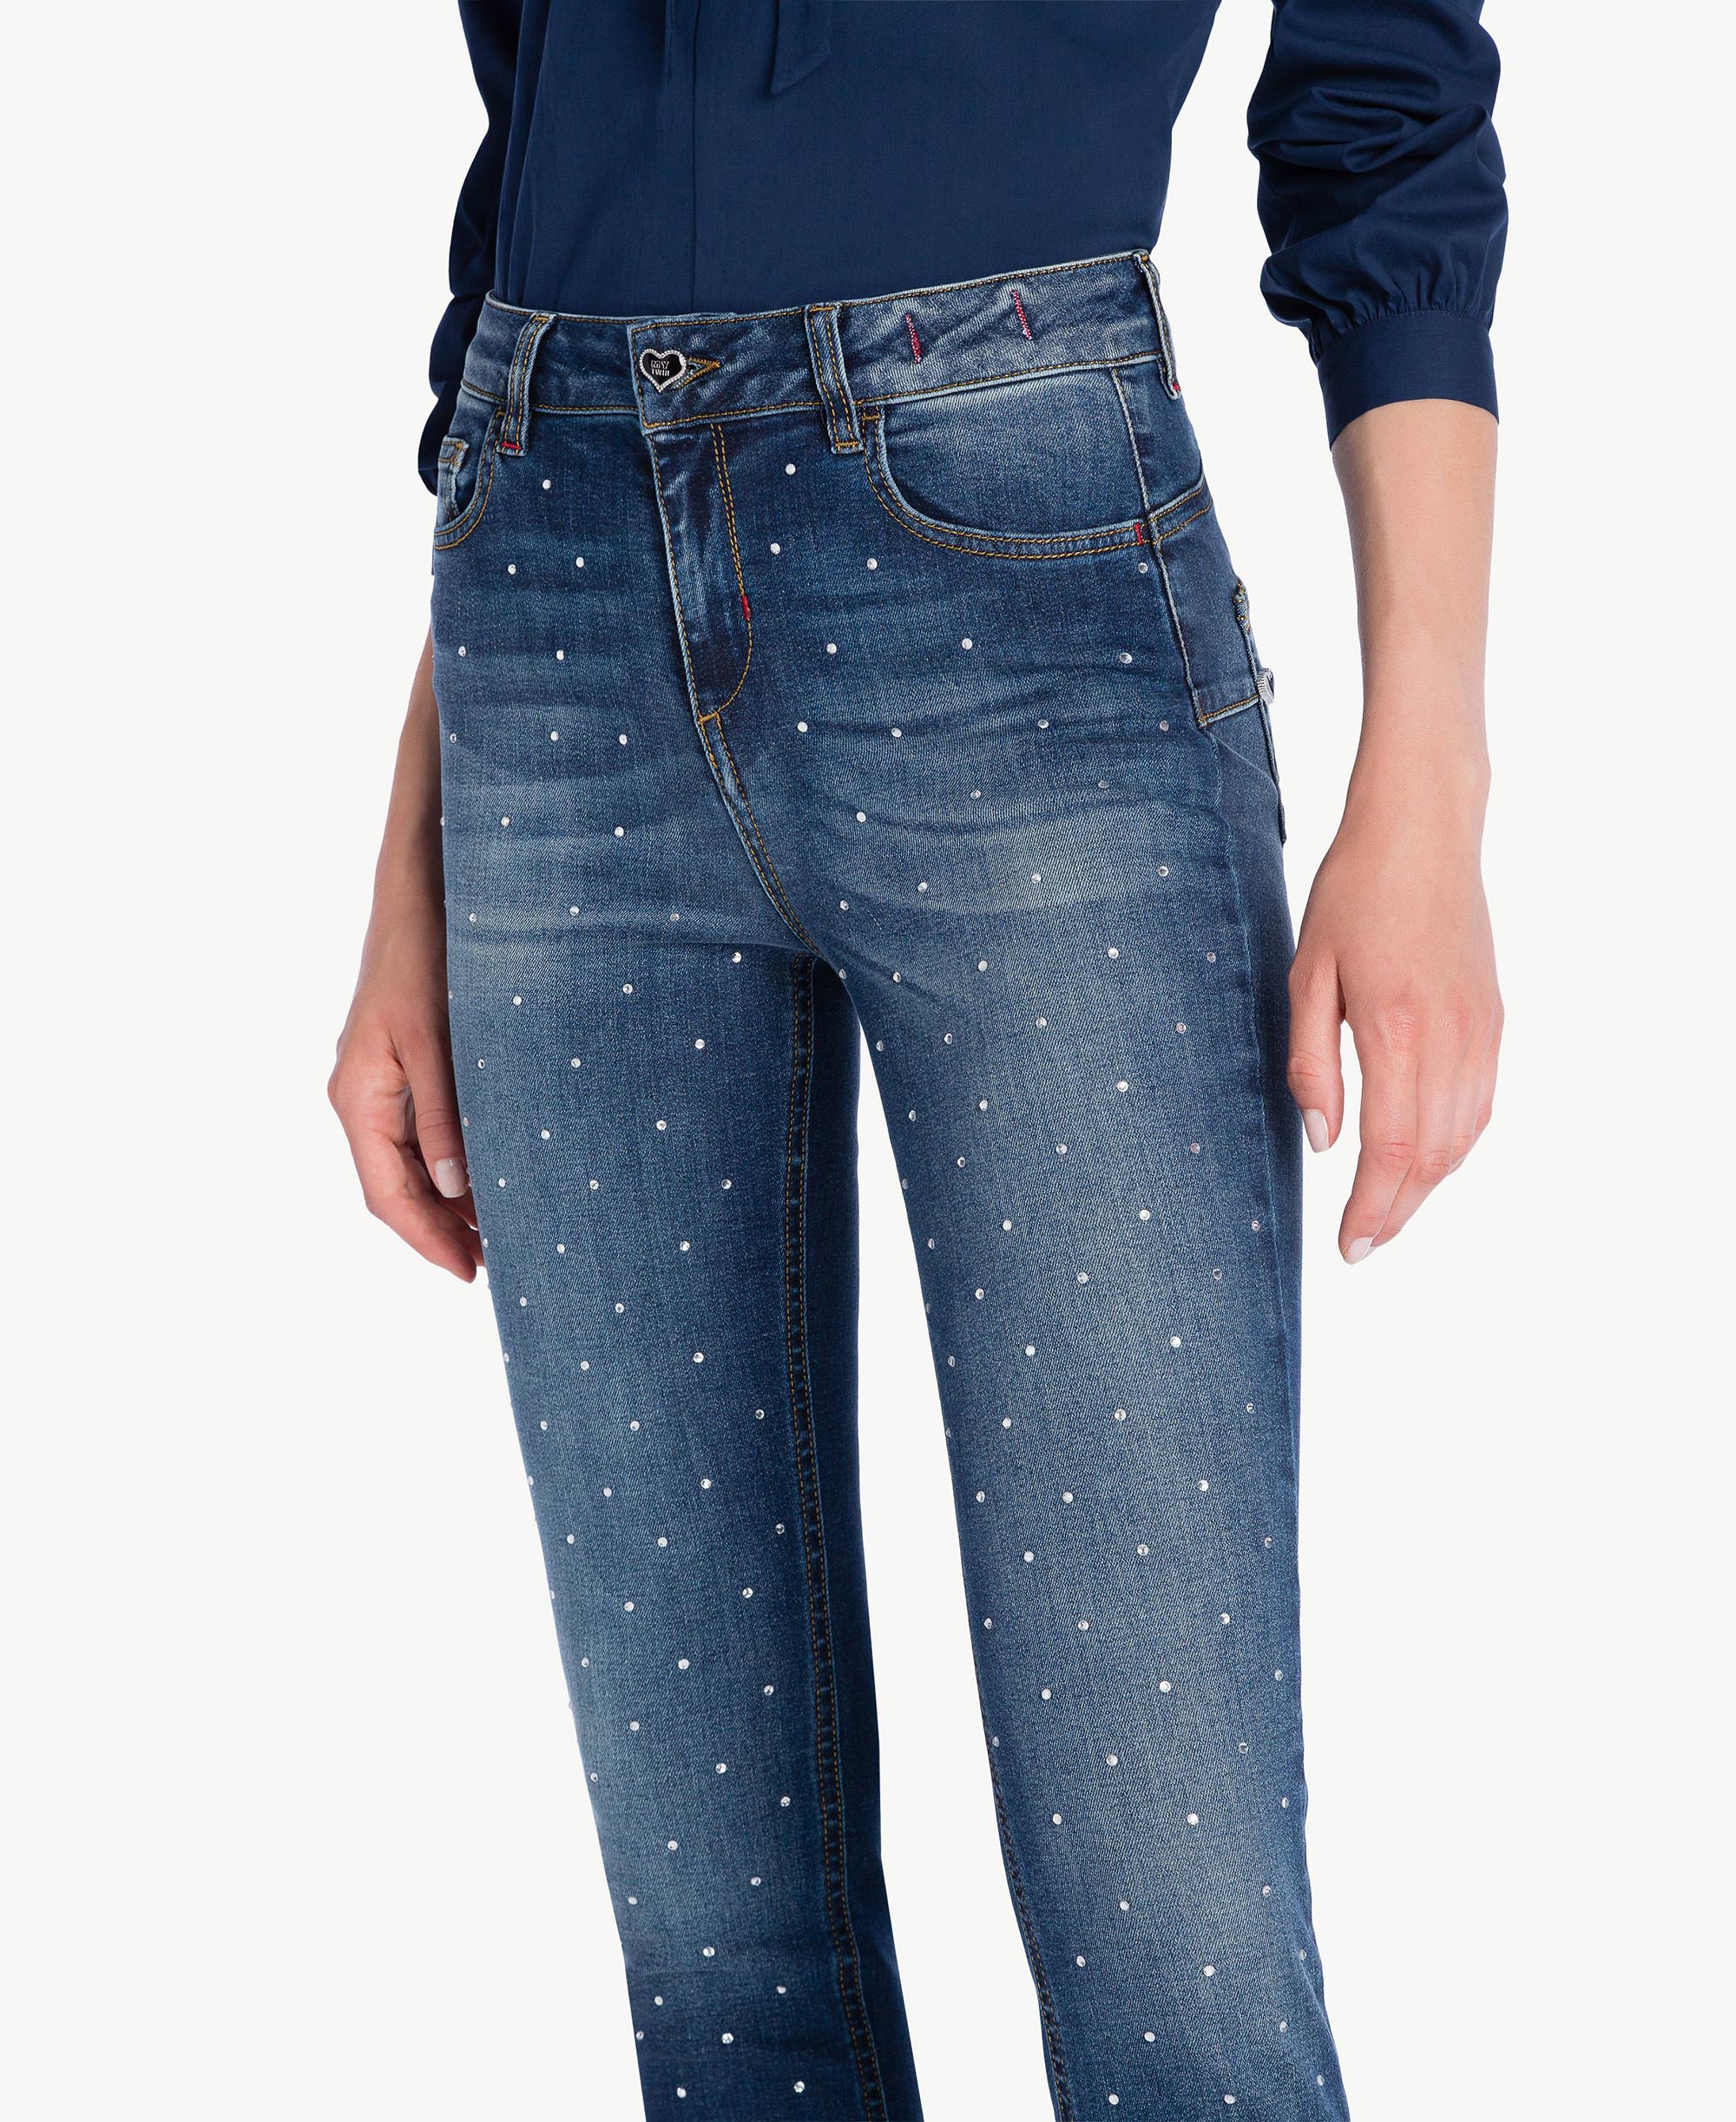 bedazzled skinny jeans